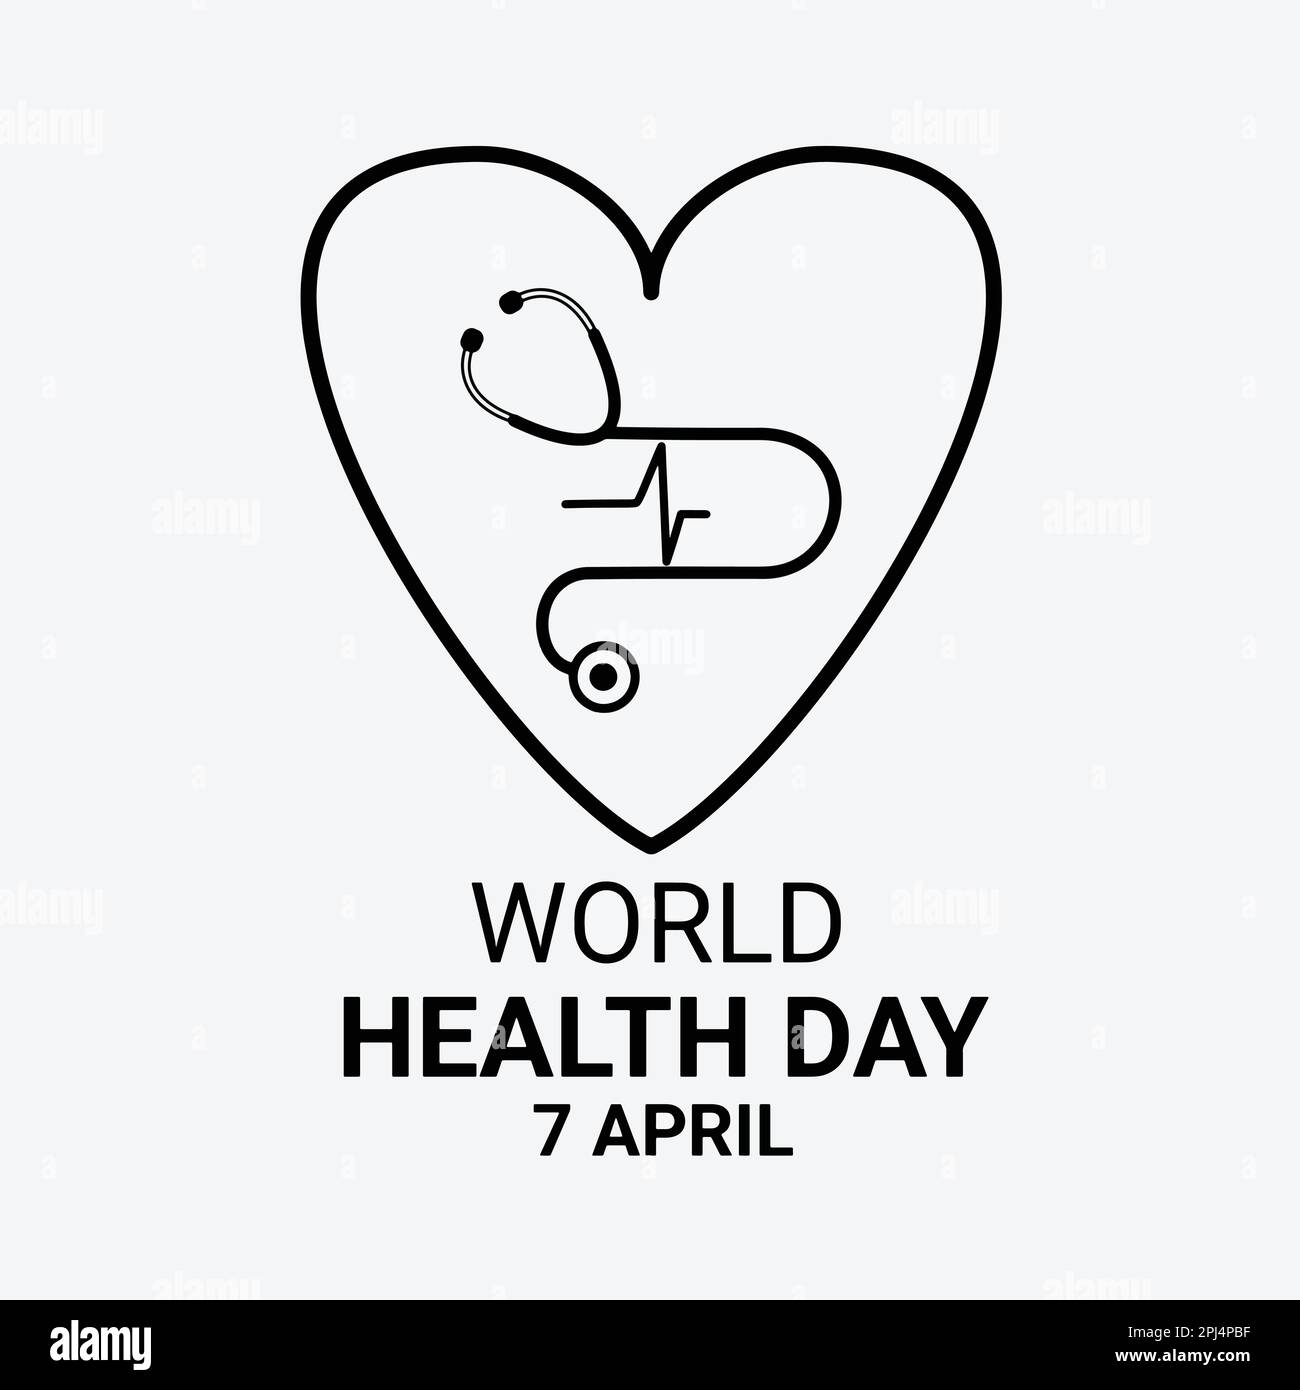 World Health Day. 7 April. Vector illustration with stethoscope and heart on white background. Stock Vector